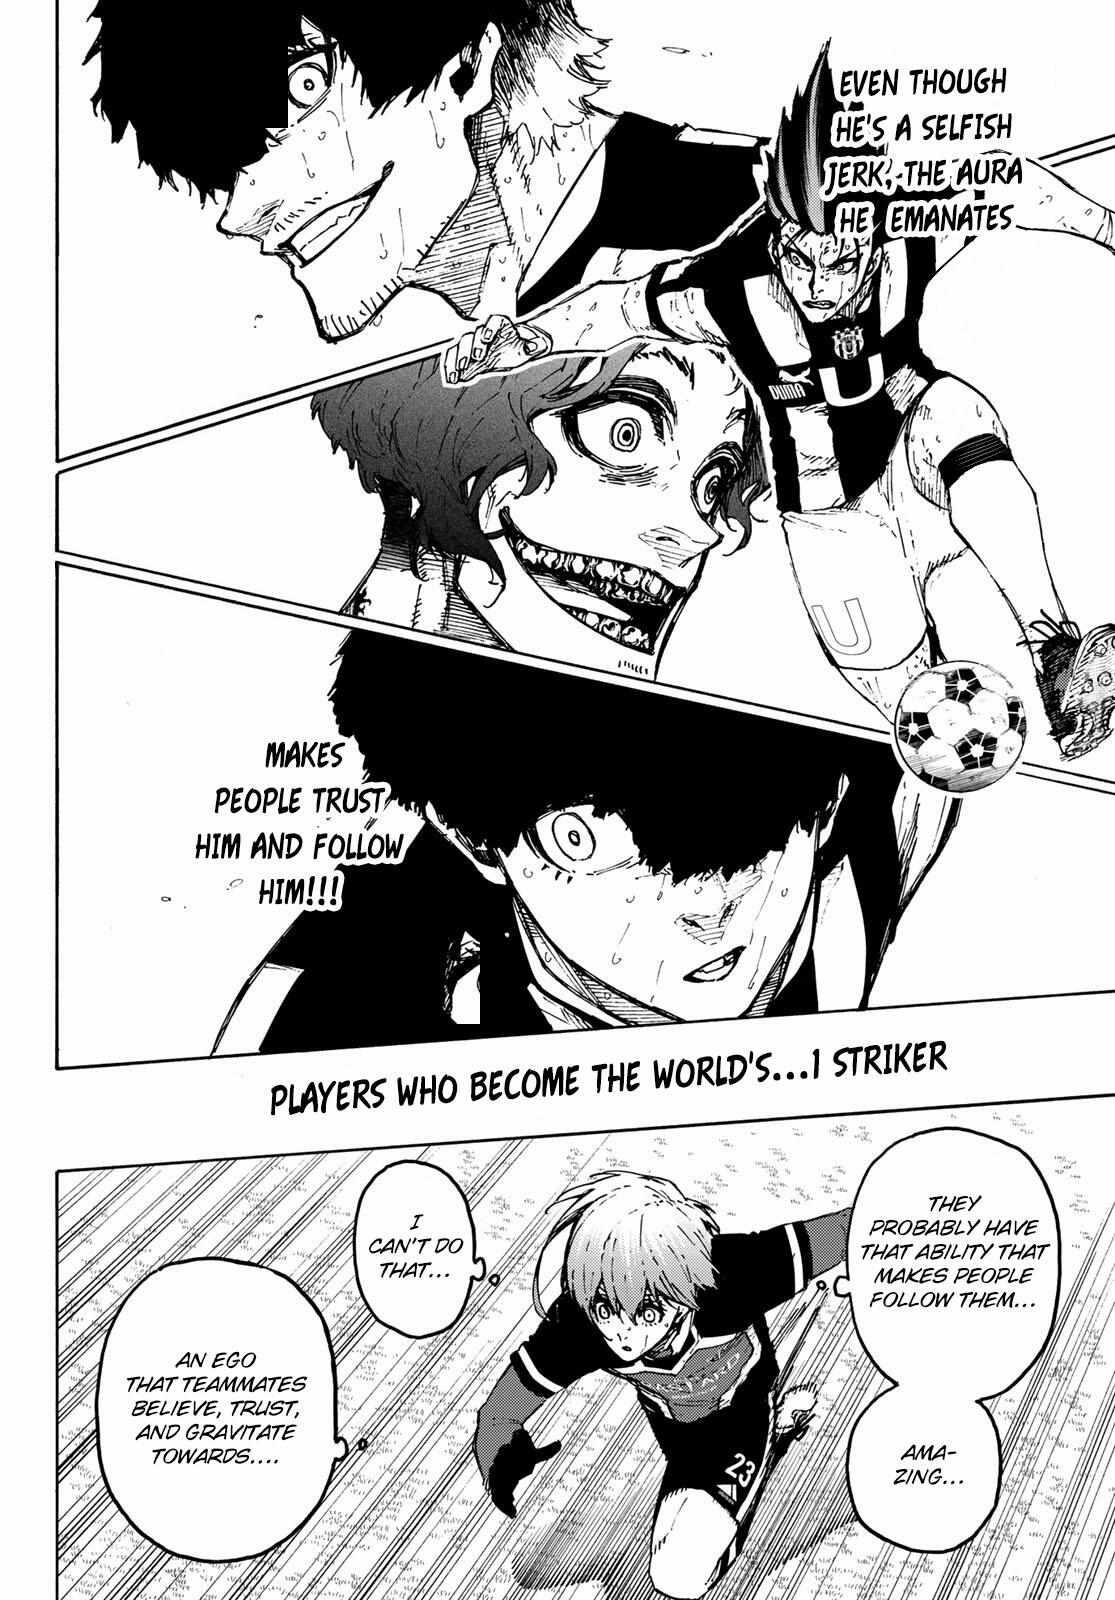 Blue Lock Manga: Most disappointing players in Neo-Egotist League